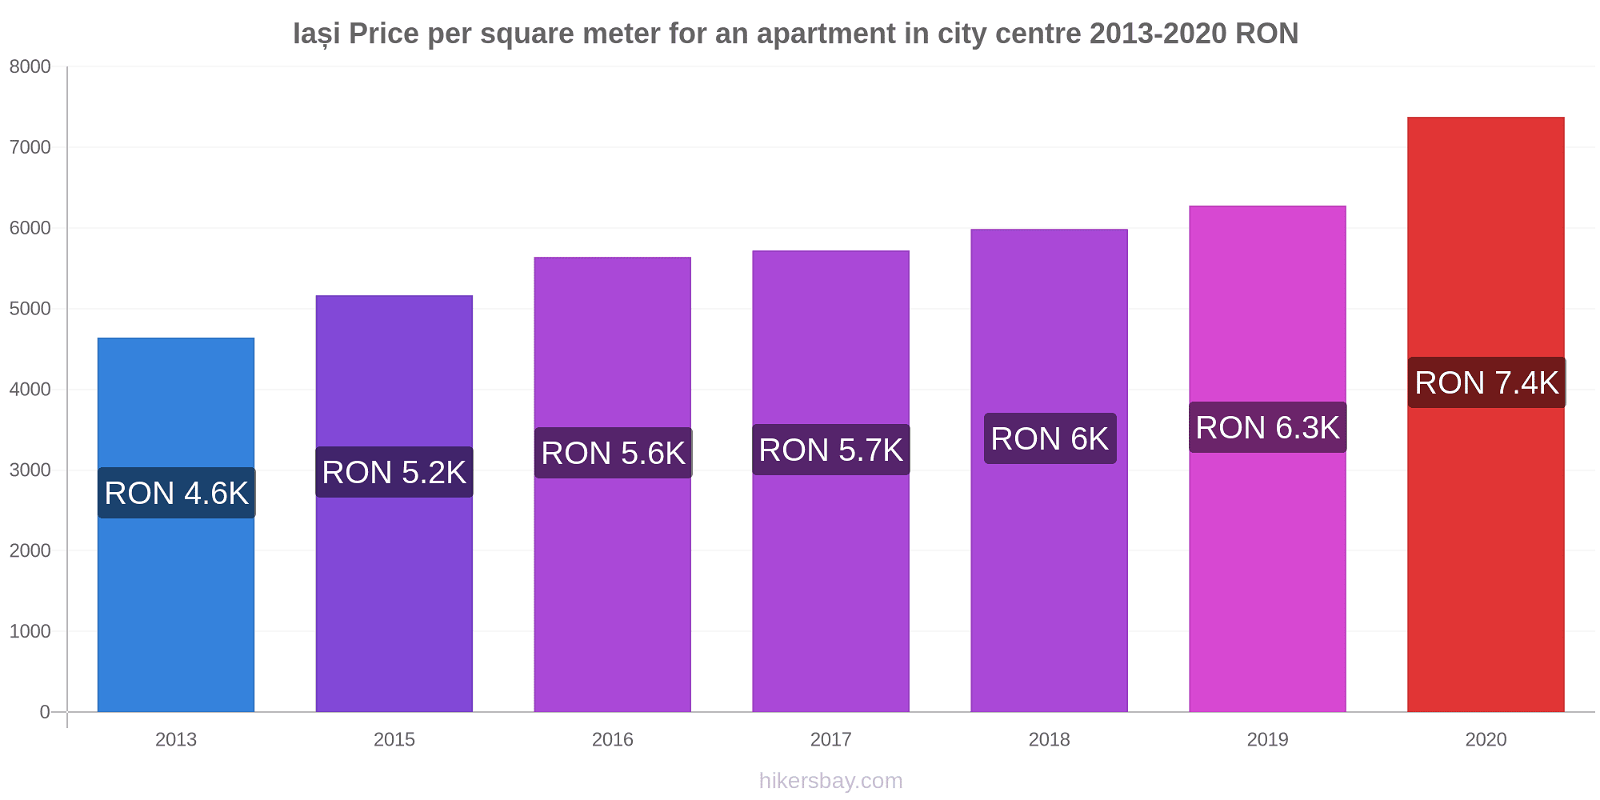 Iași price changes Price per square meter for an apartment in city centre hikersbay.com